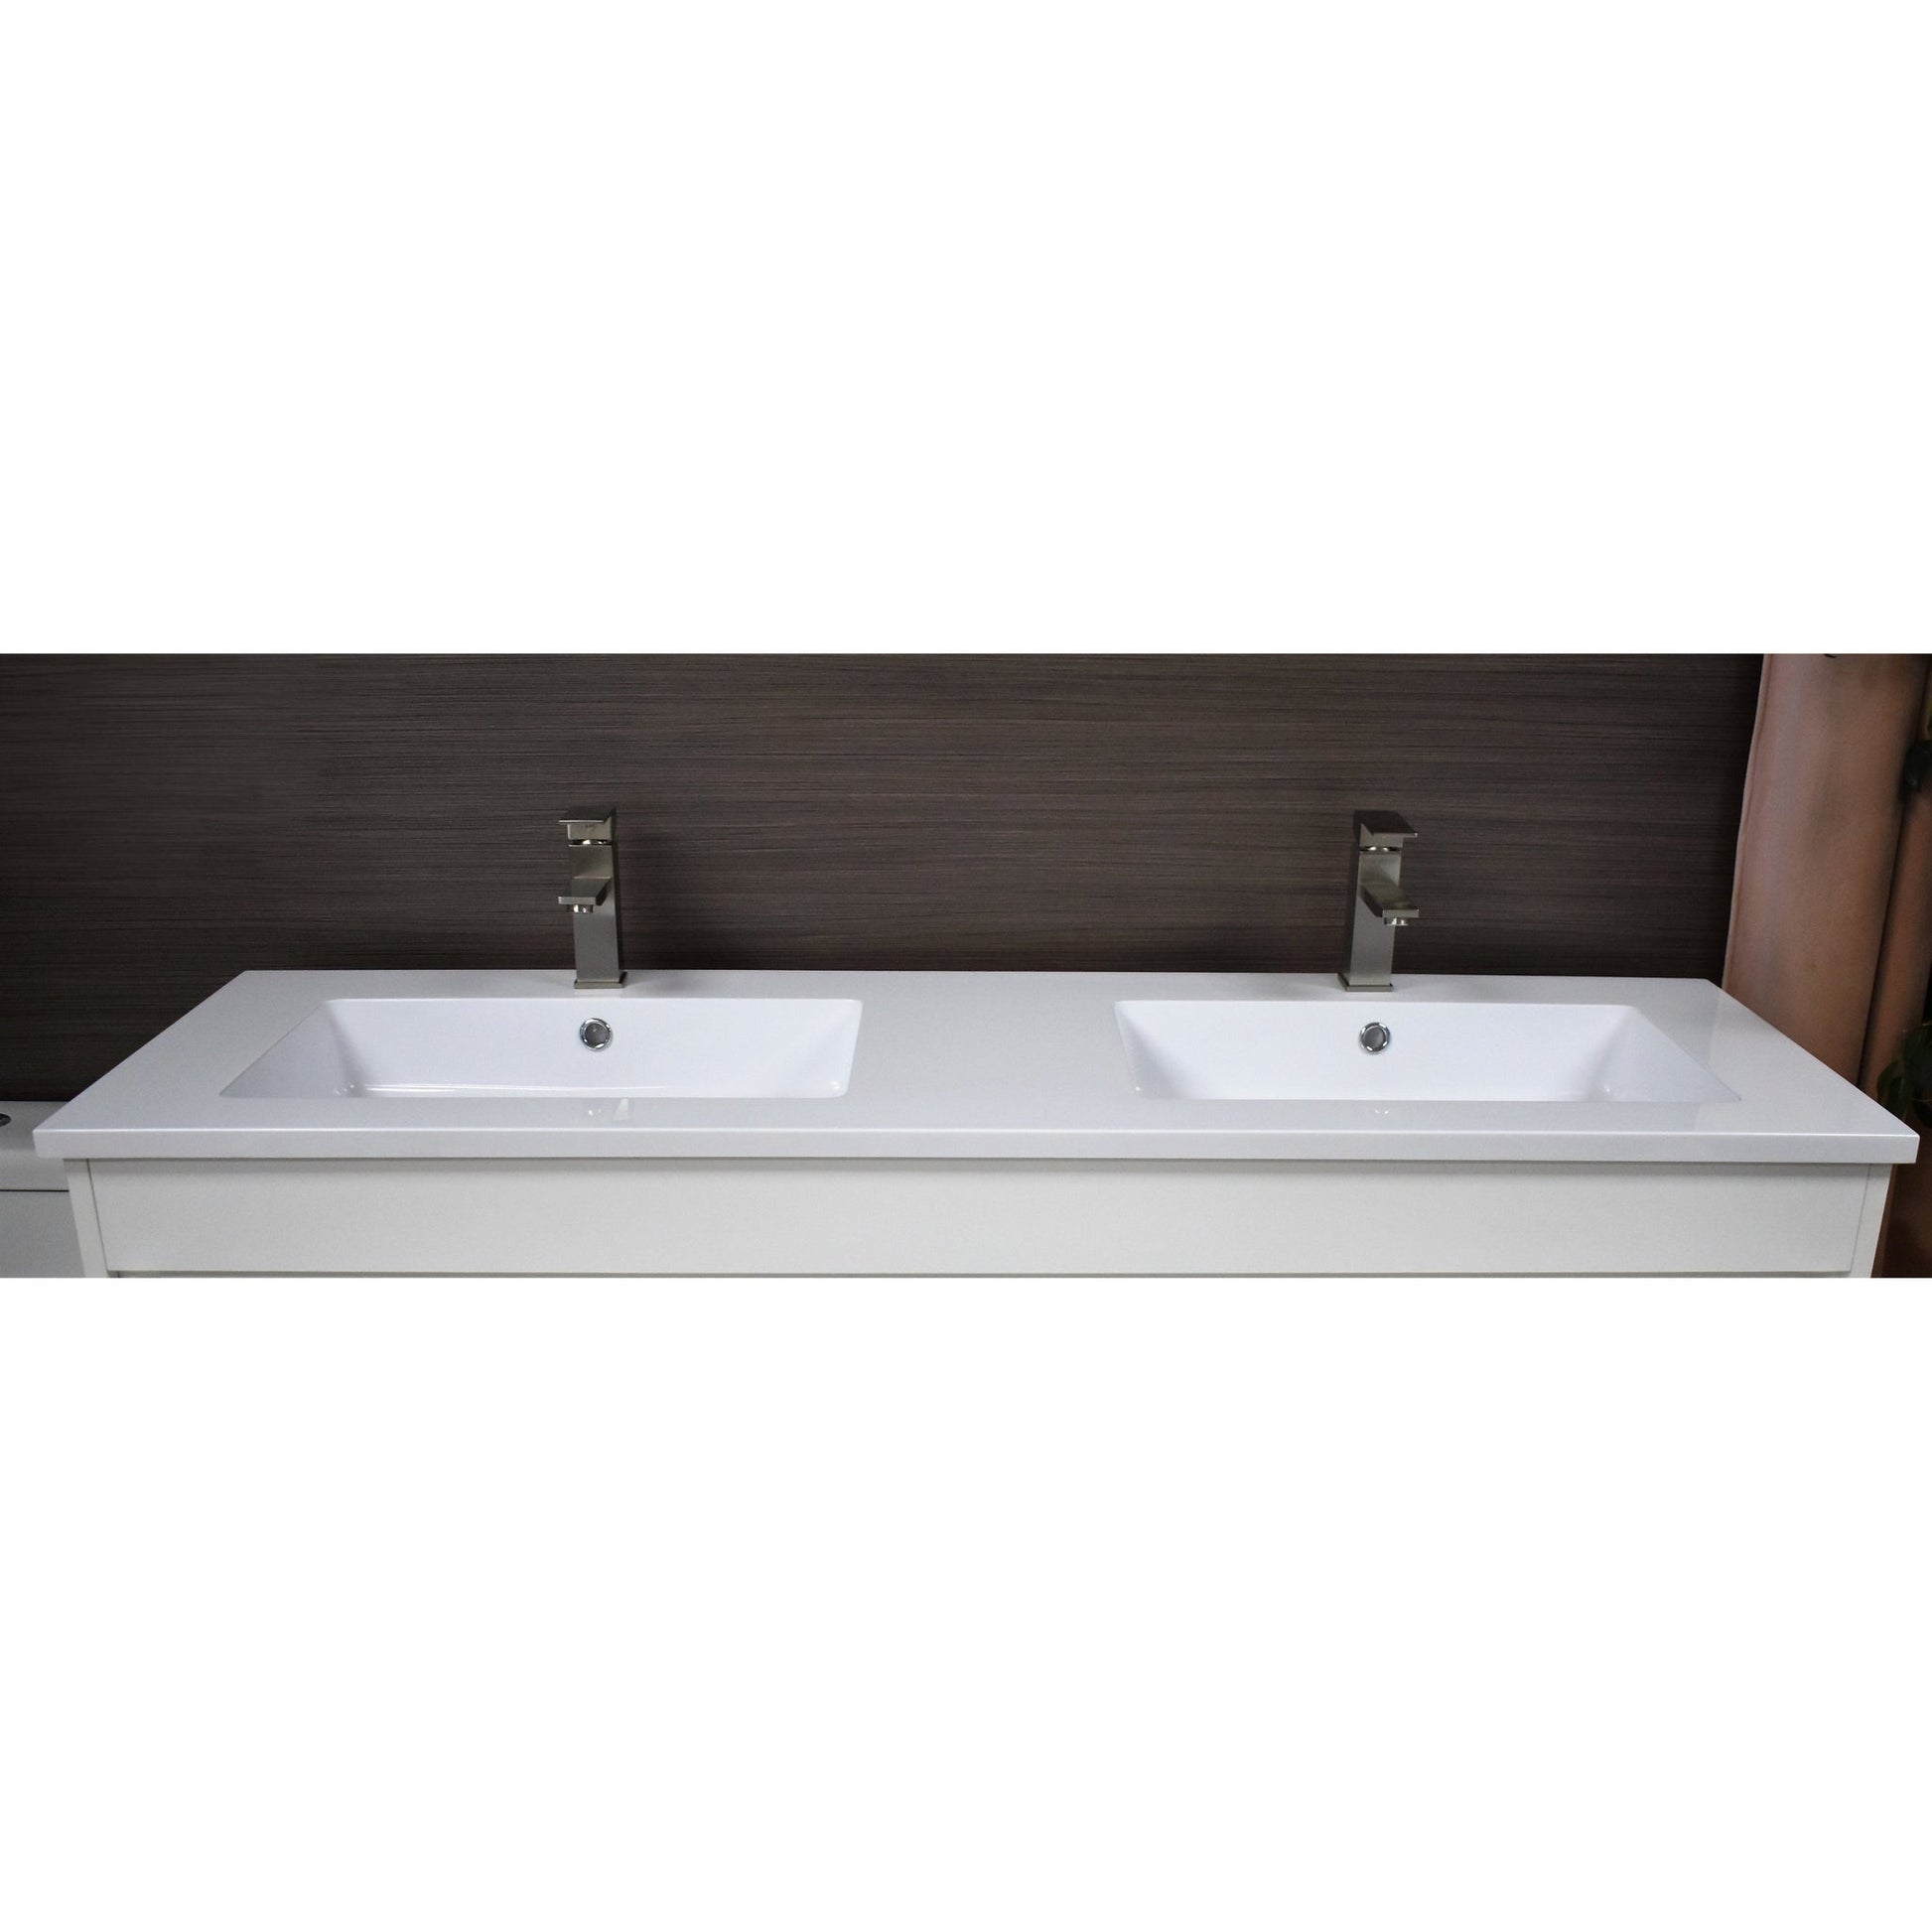 Volpa USA Rio 60" White Freestanding Modern Bathroom Vanity With Integrated Acrylic Double Sink Top and Brushed Nickel Handles